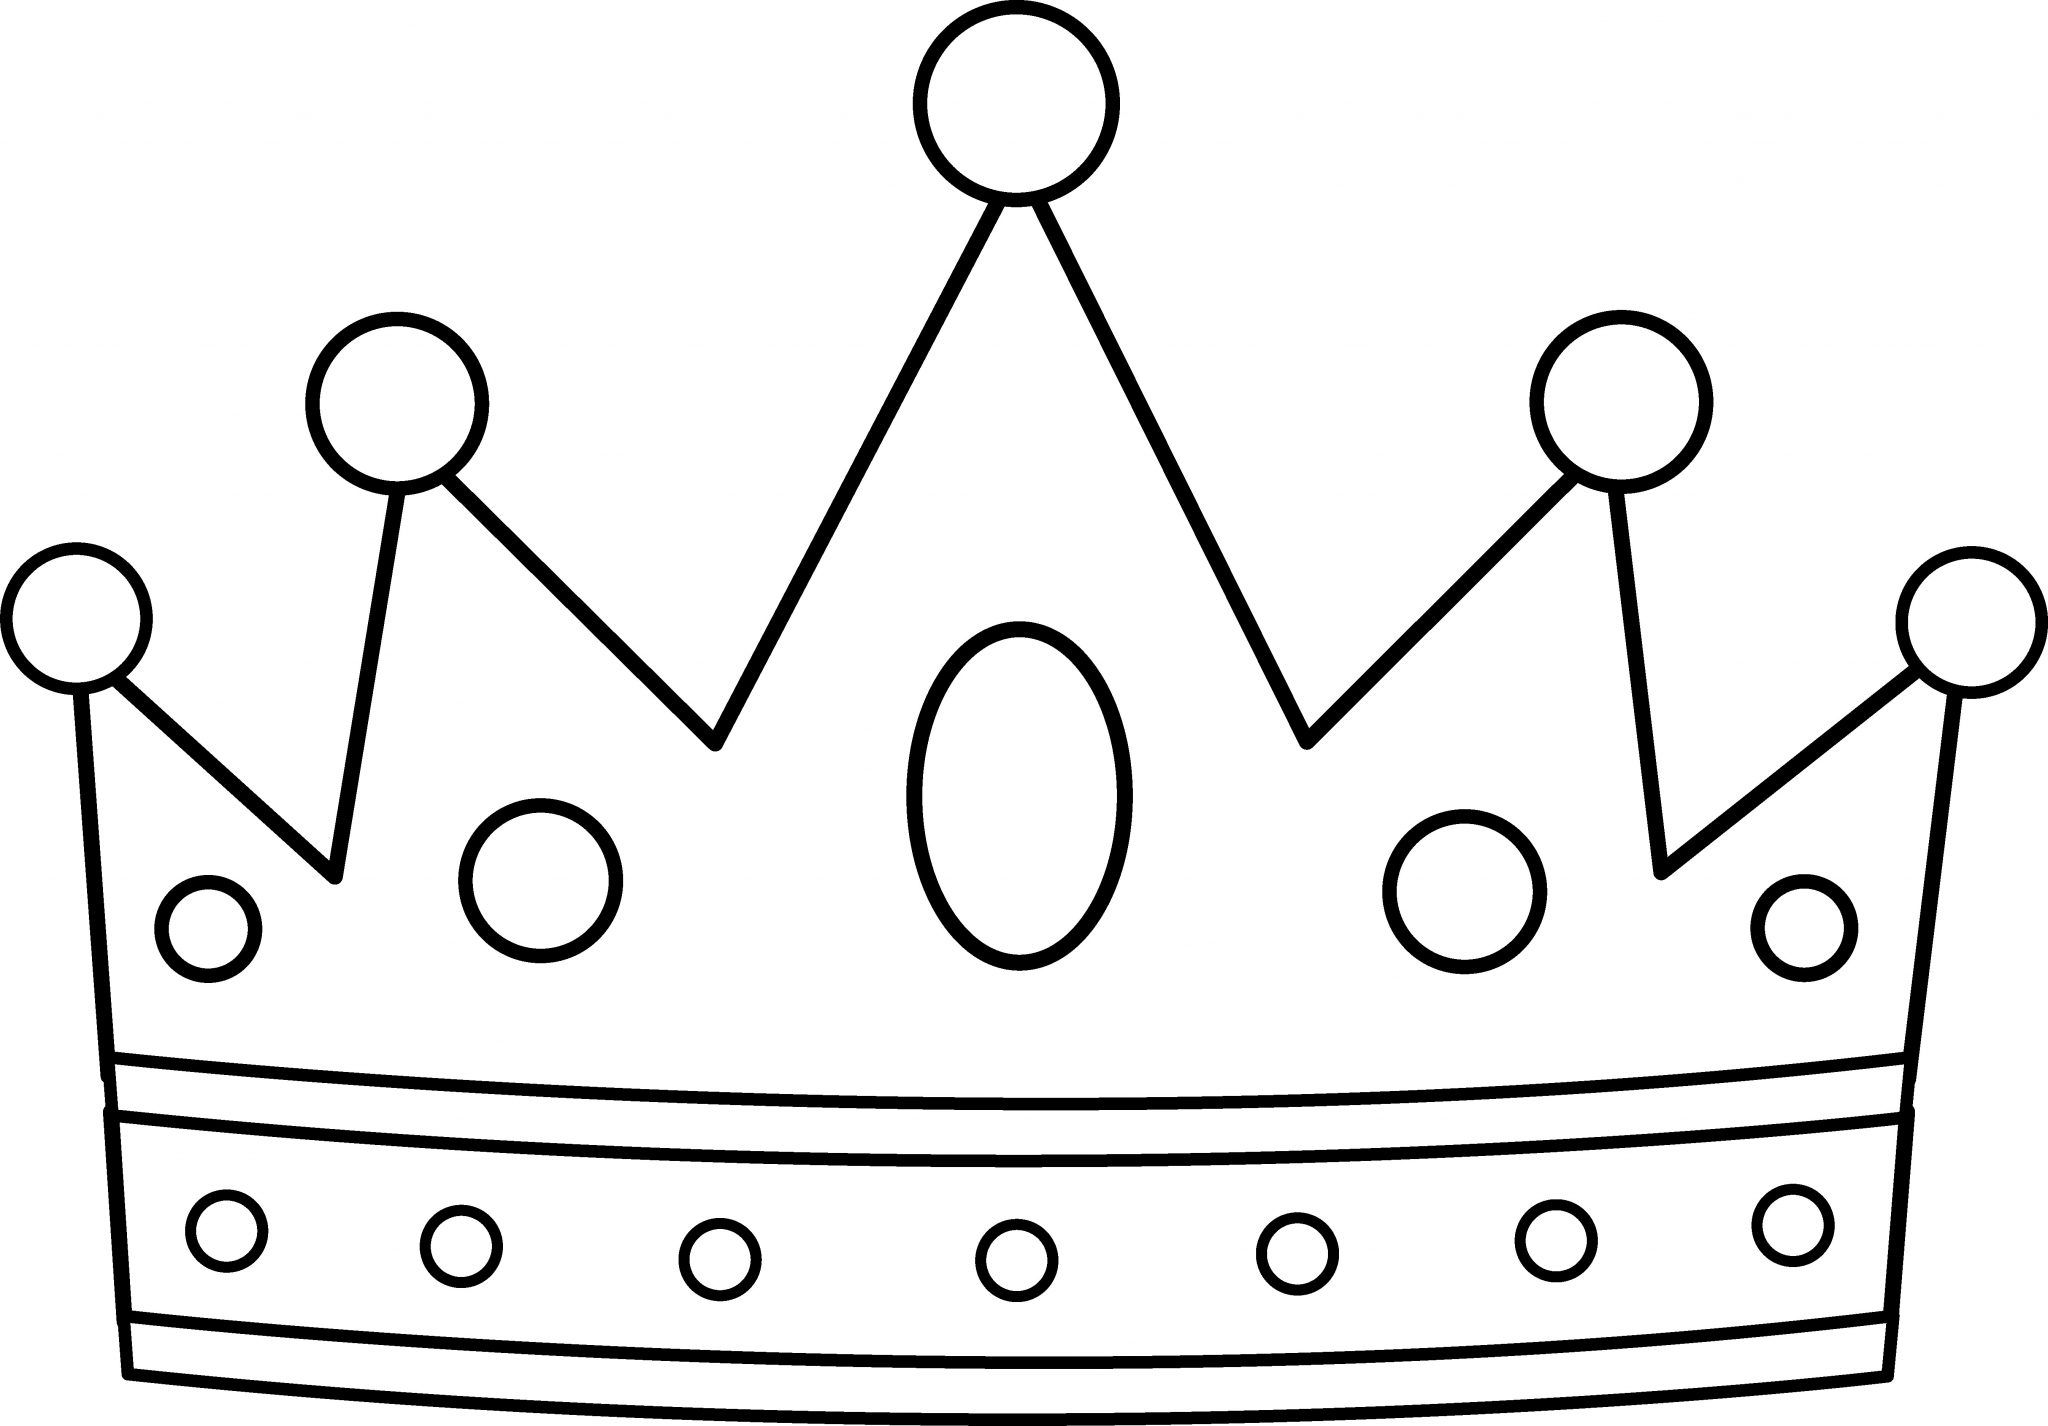 Print And Color Crown Coloring Page